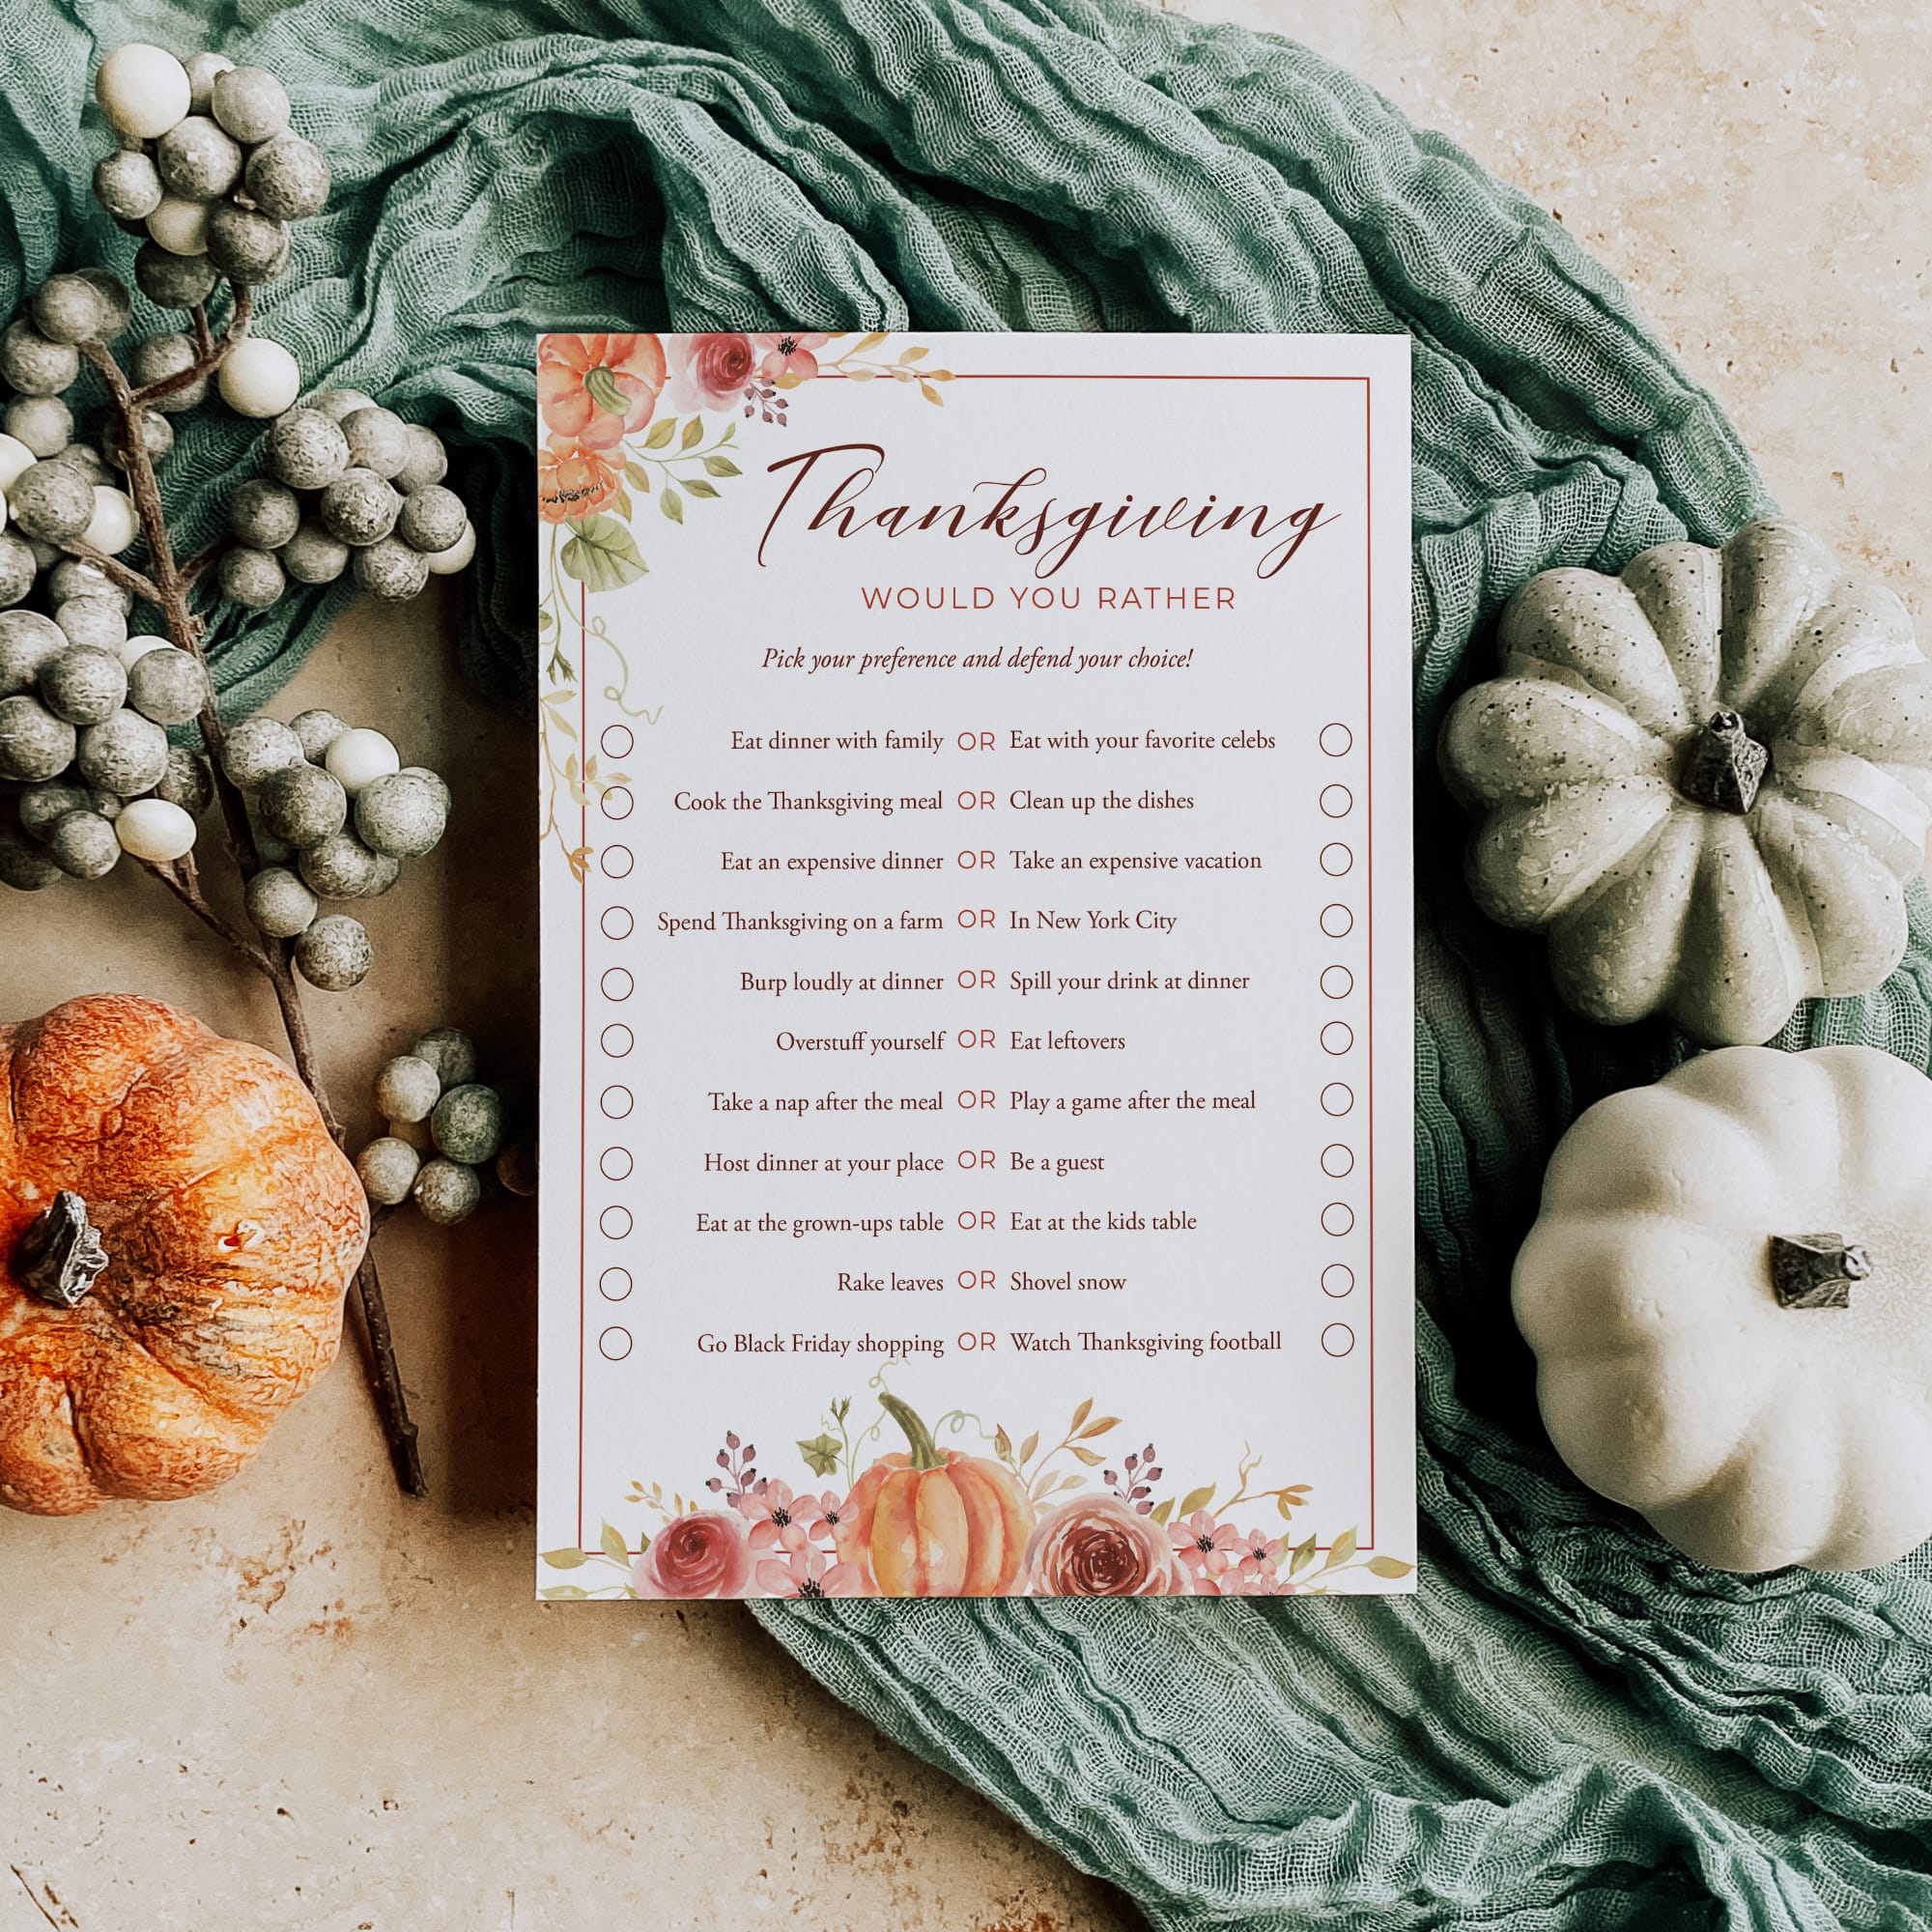 70 Fun Thanksgiving Would You Rather Questions (Free Printable)